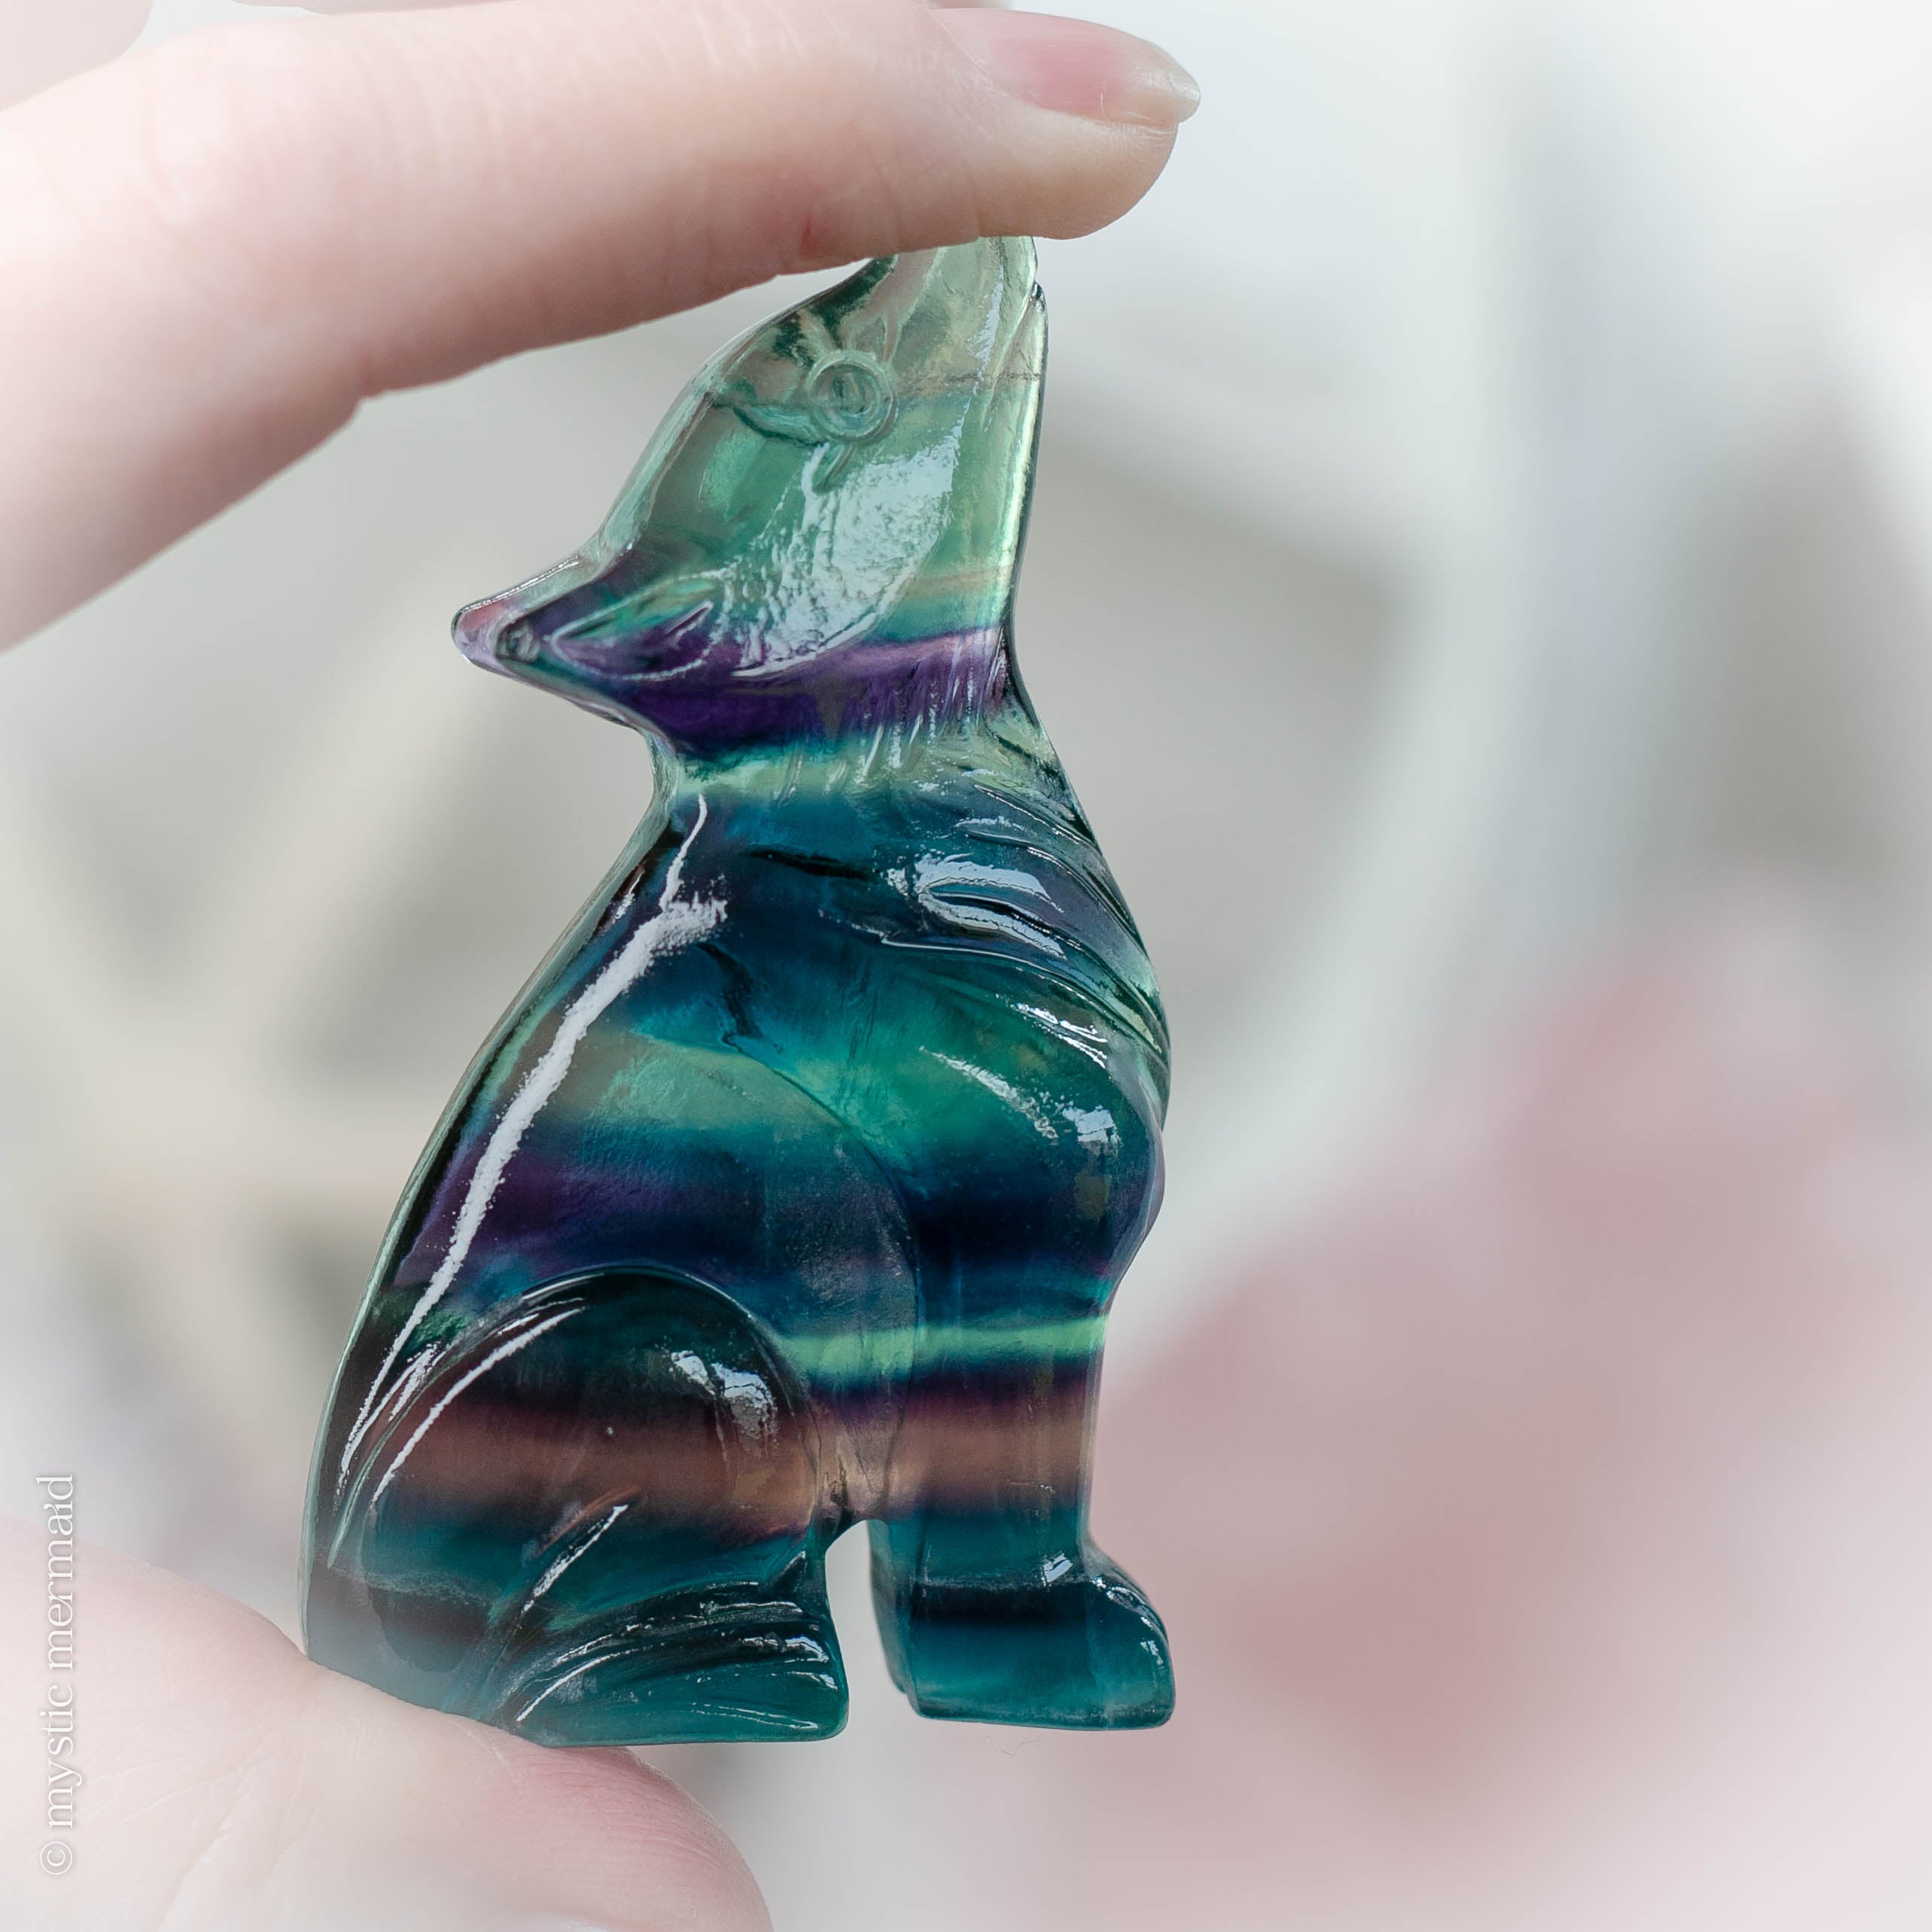 Rainbow Fluorite Howling Wolf Fairtrade Crystal Carving